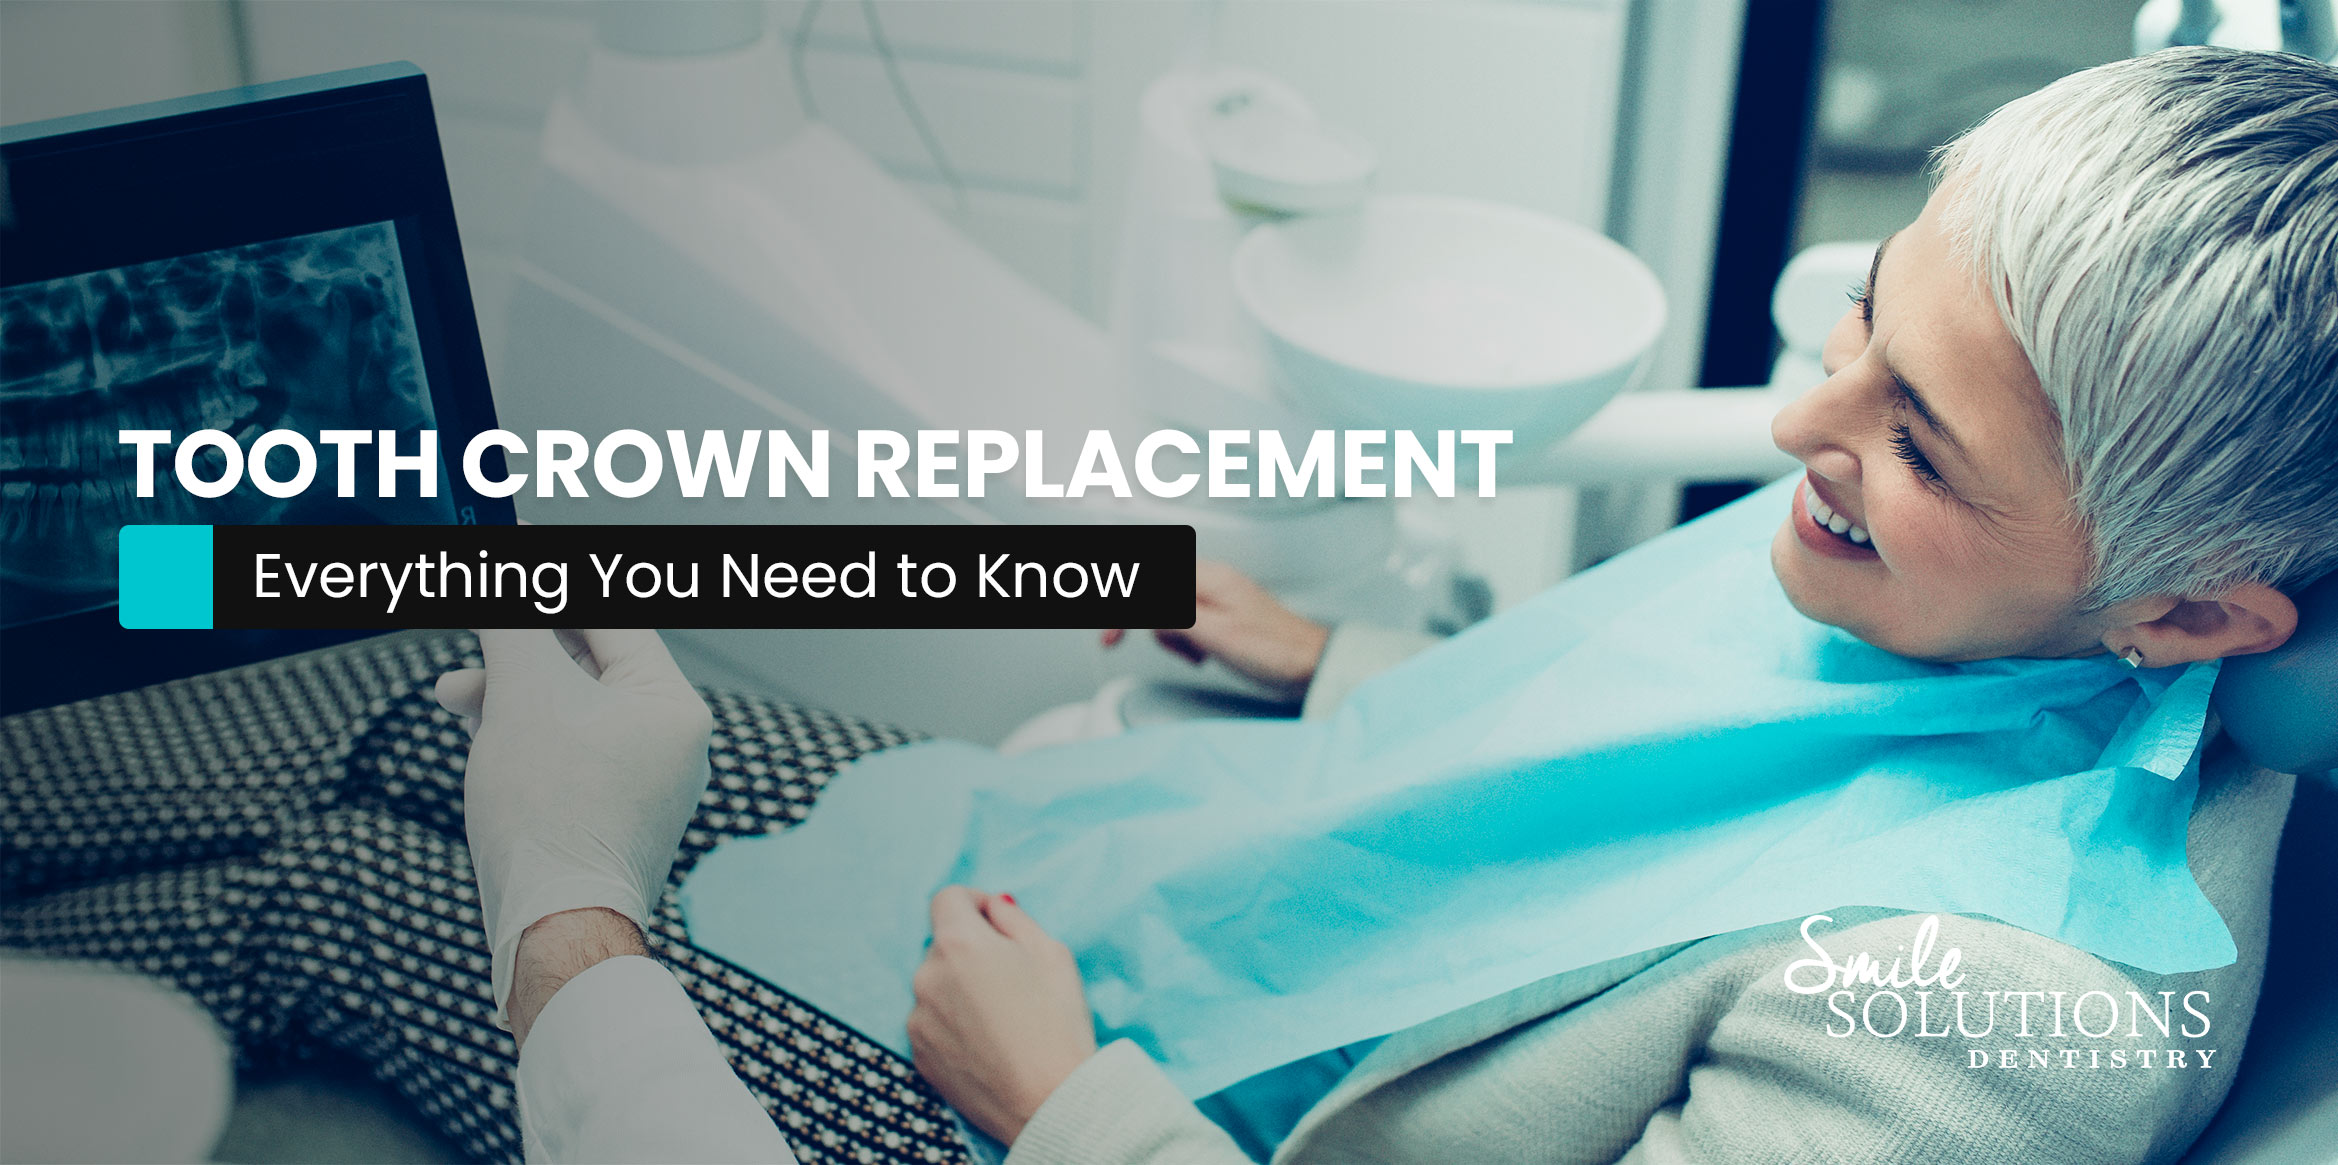 Everything You Need to Know About Tooth Crown Replacements